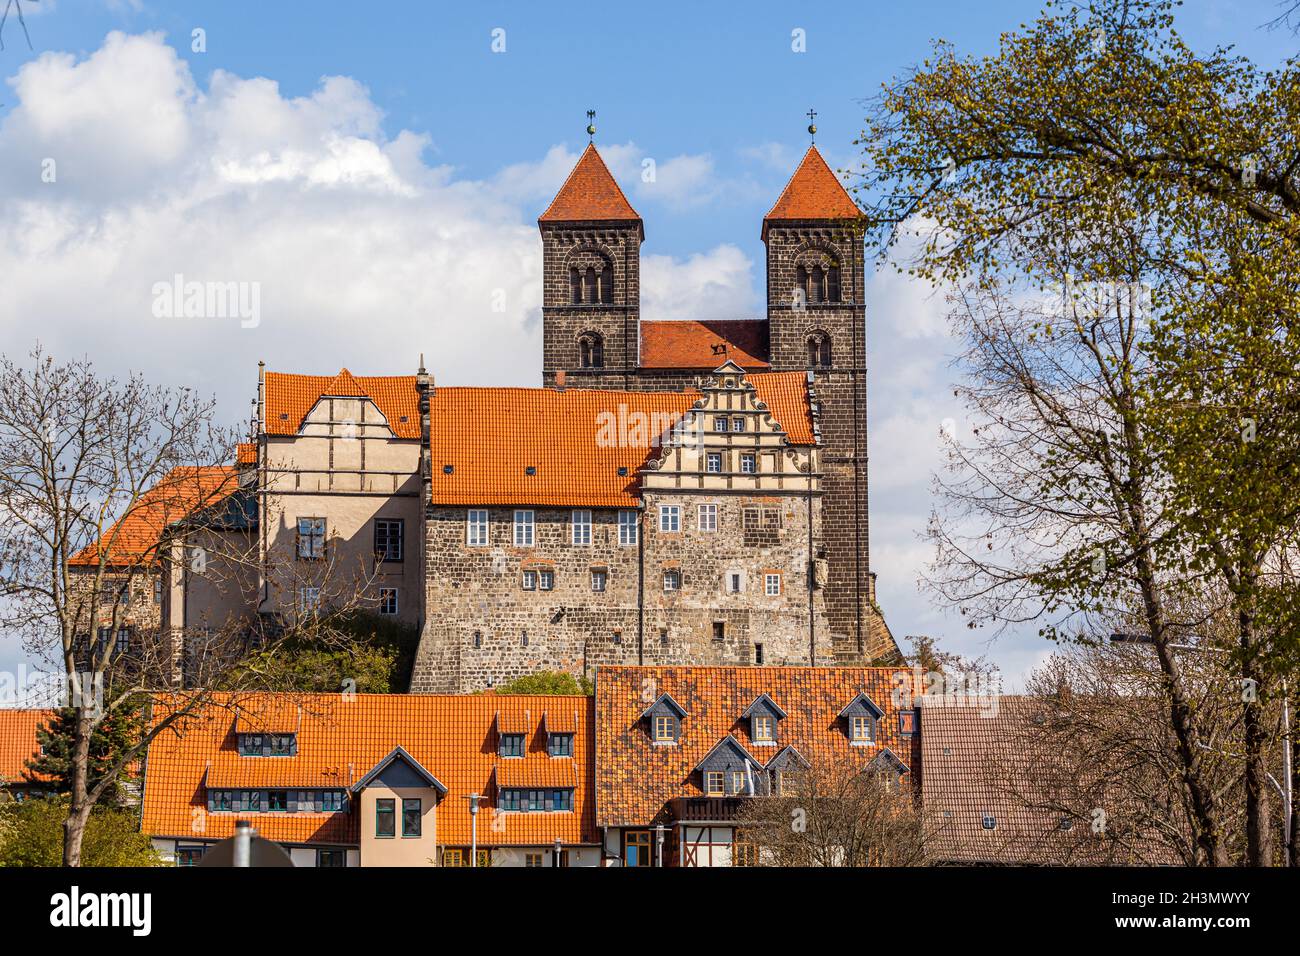 Pictures from Quedlinburg in the Harz Mountains World Heritage City Stock Photo